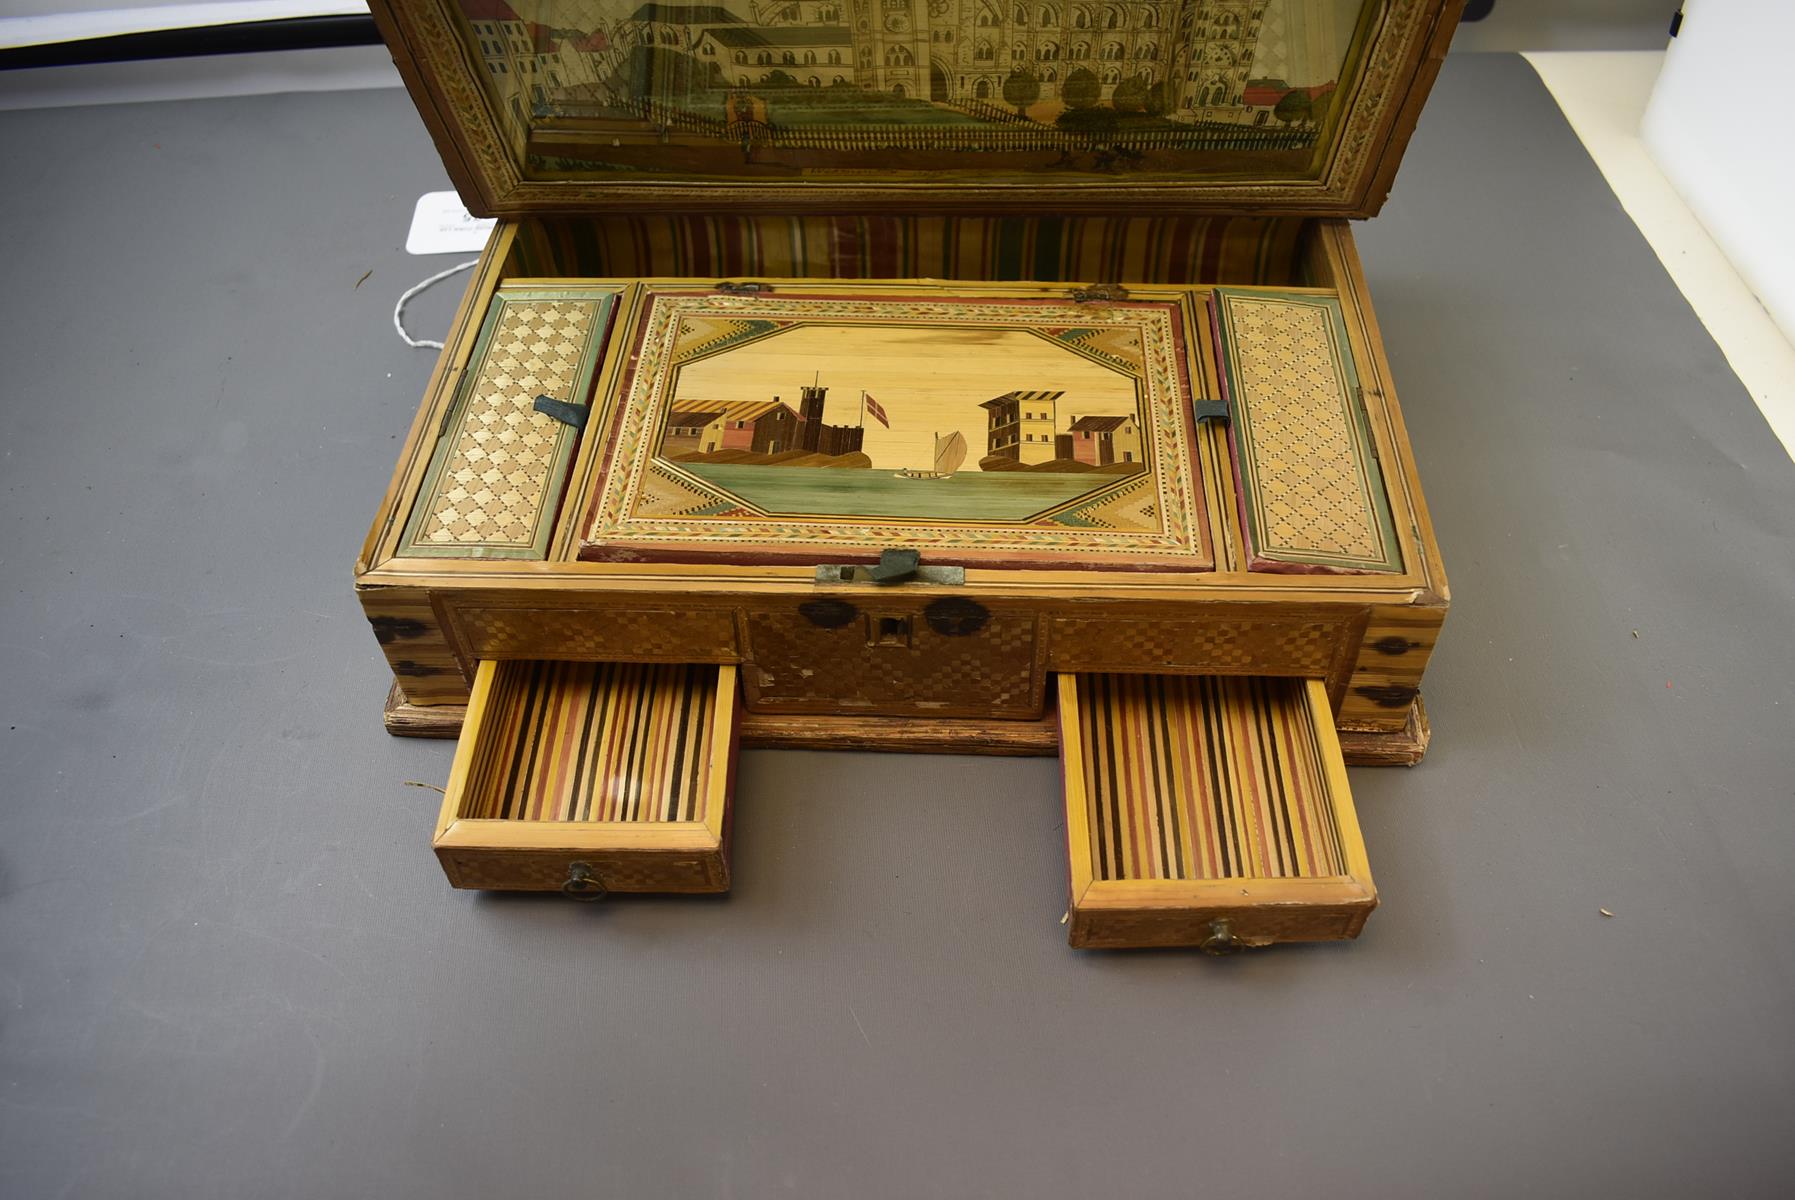 AN EARLY 19TH CENTURY NAPOLEONIC PRISONER OF WAR STRAW-WORK BOX, in the form of a book, the outer - Image 12 of 12